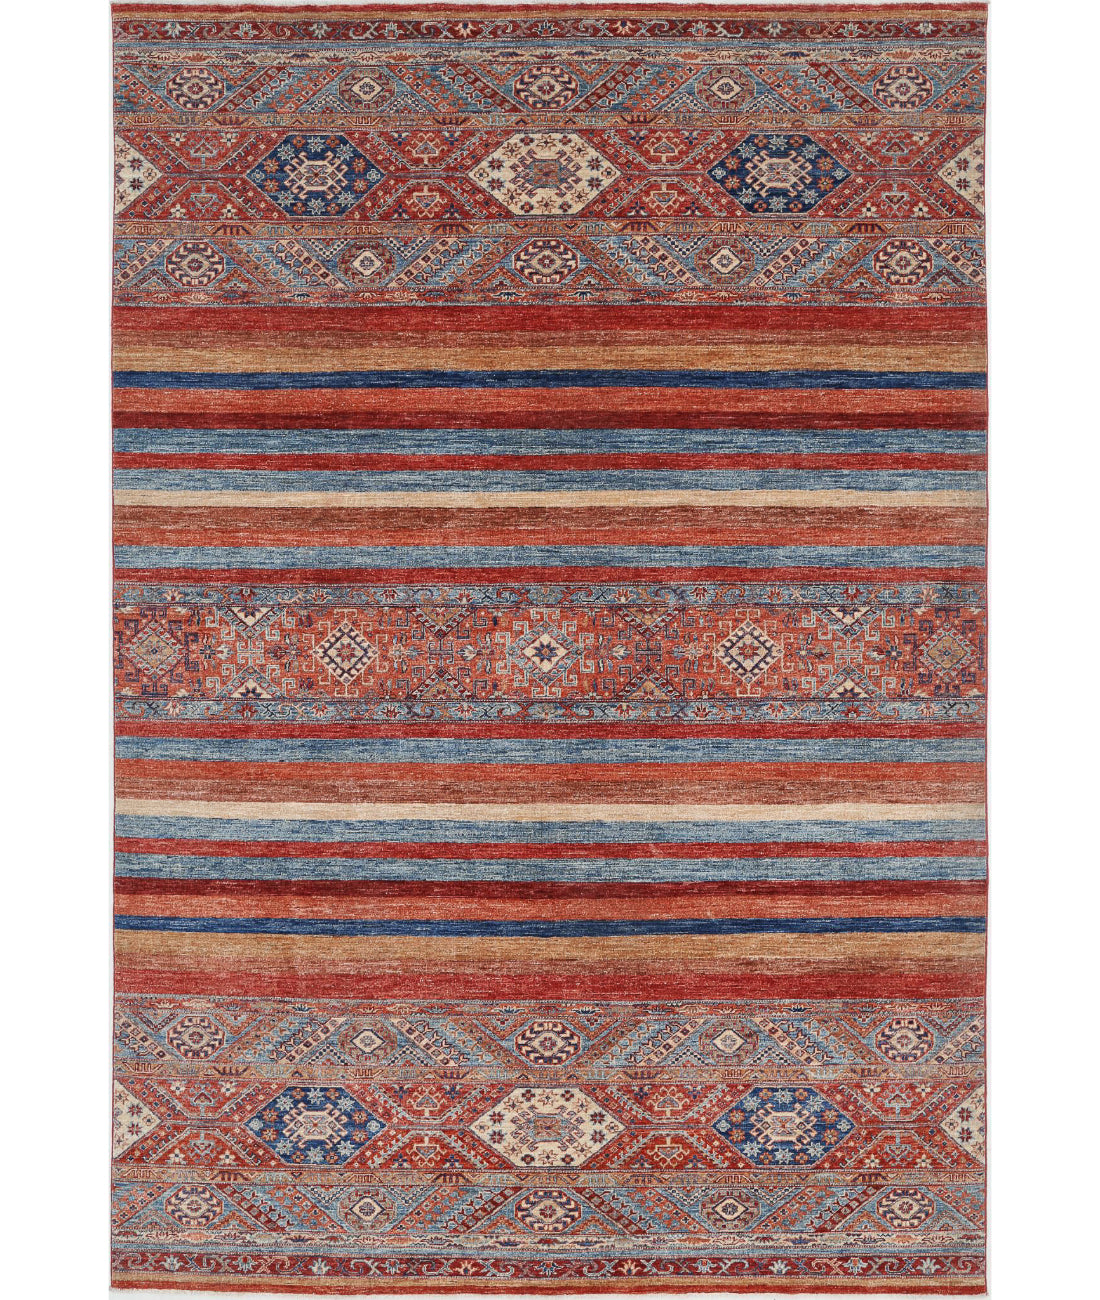 Hand Knotted Khurjeen Wool Rug - 6'9'' x 9'11'' 6'9'' x 9'11'' (203 X 298) / Multi / Multi